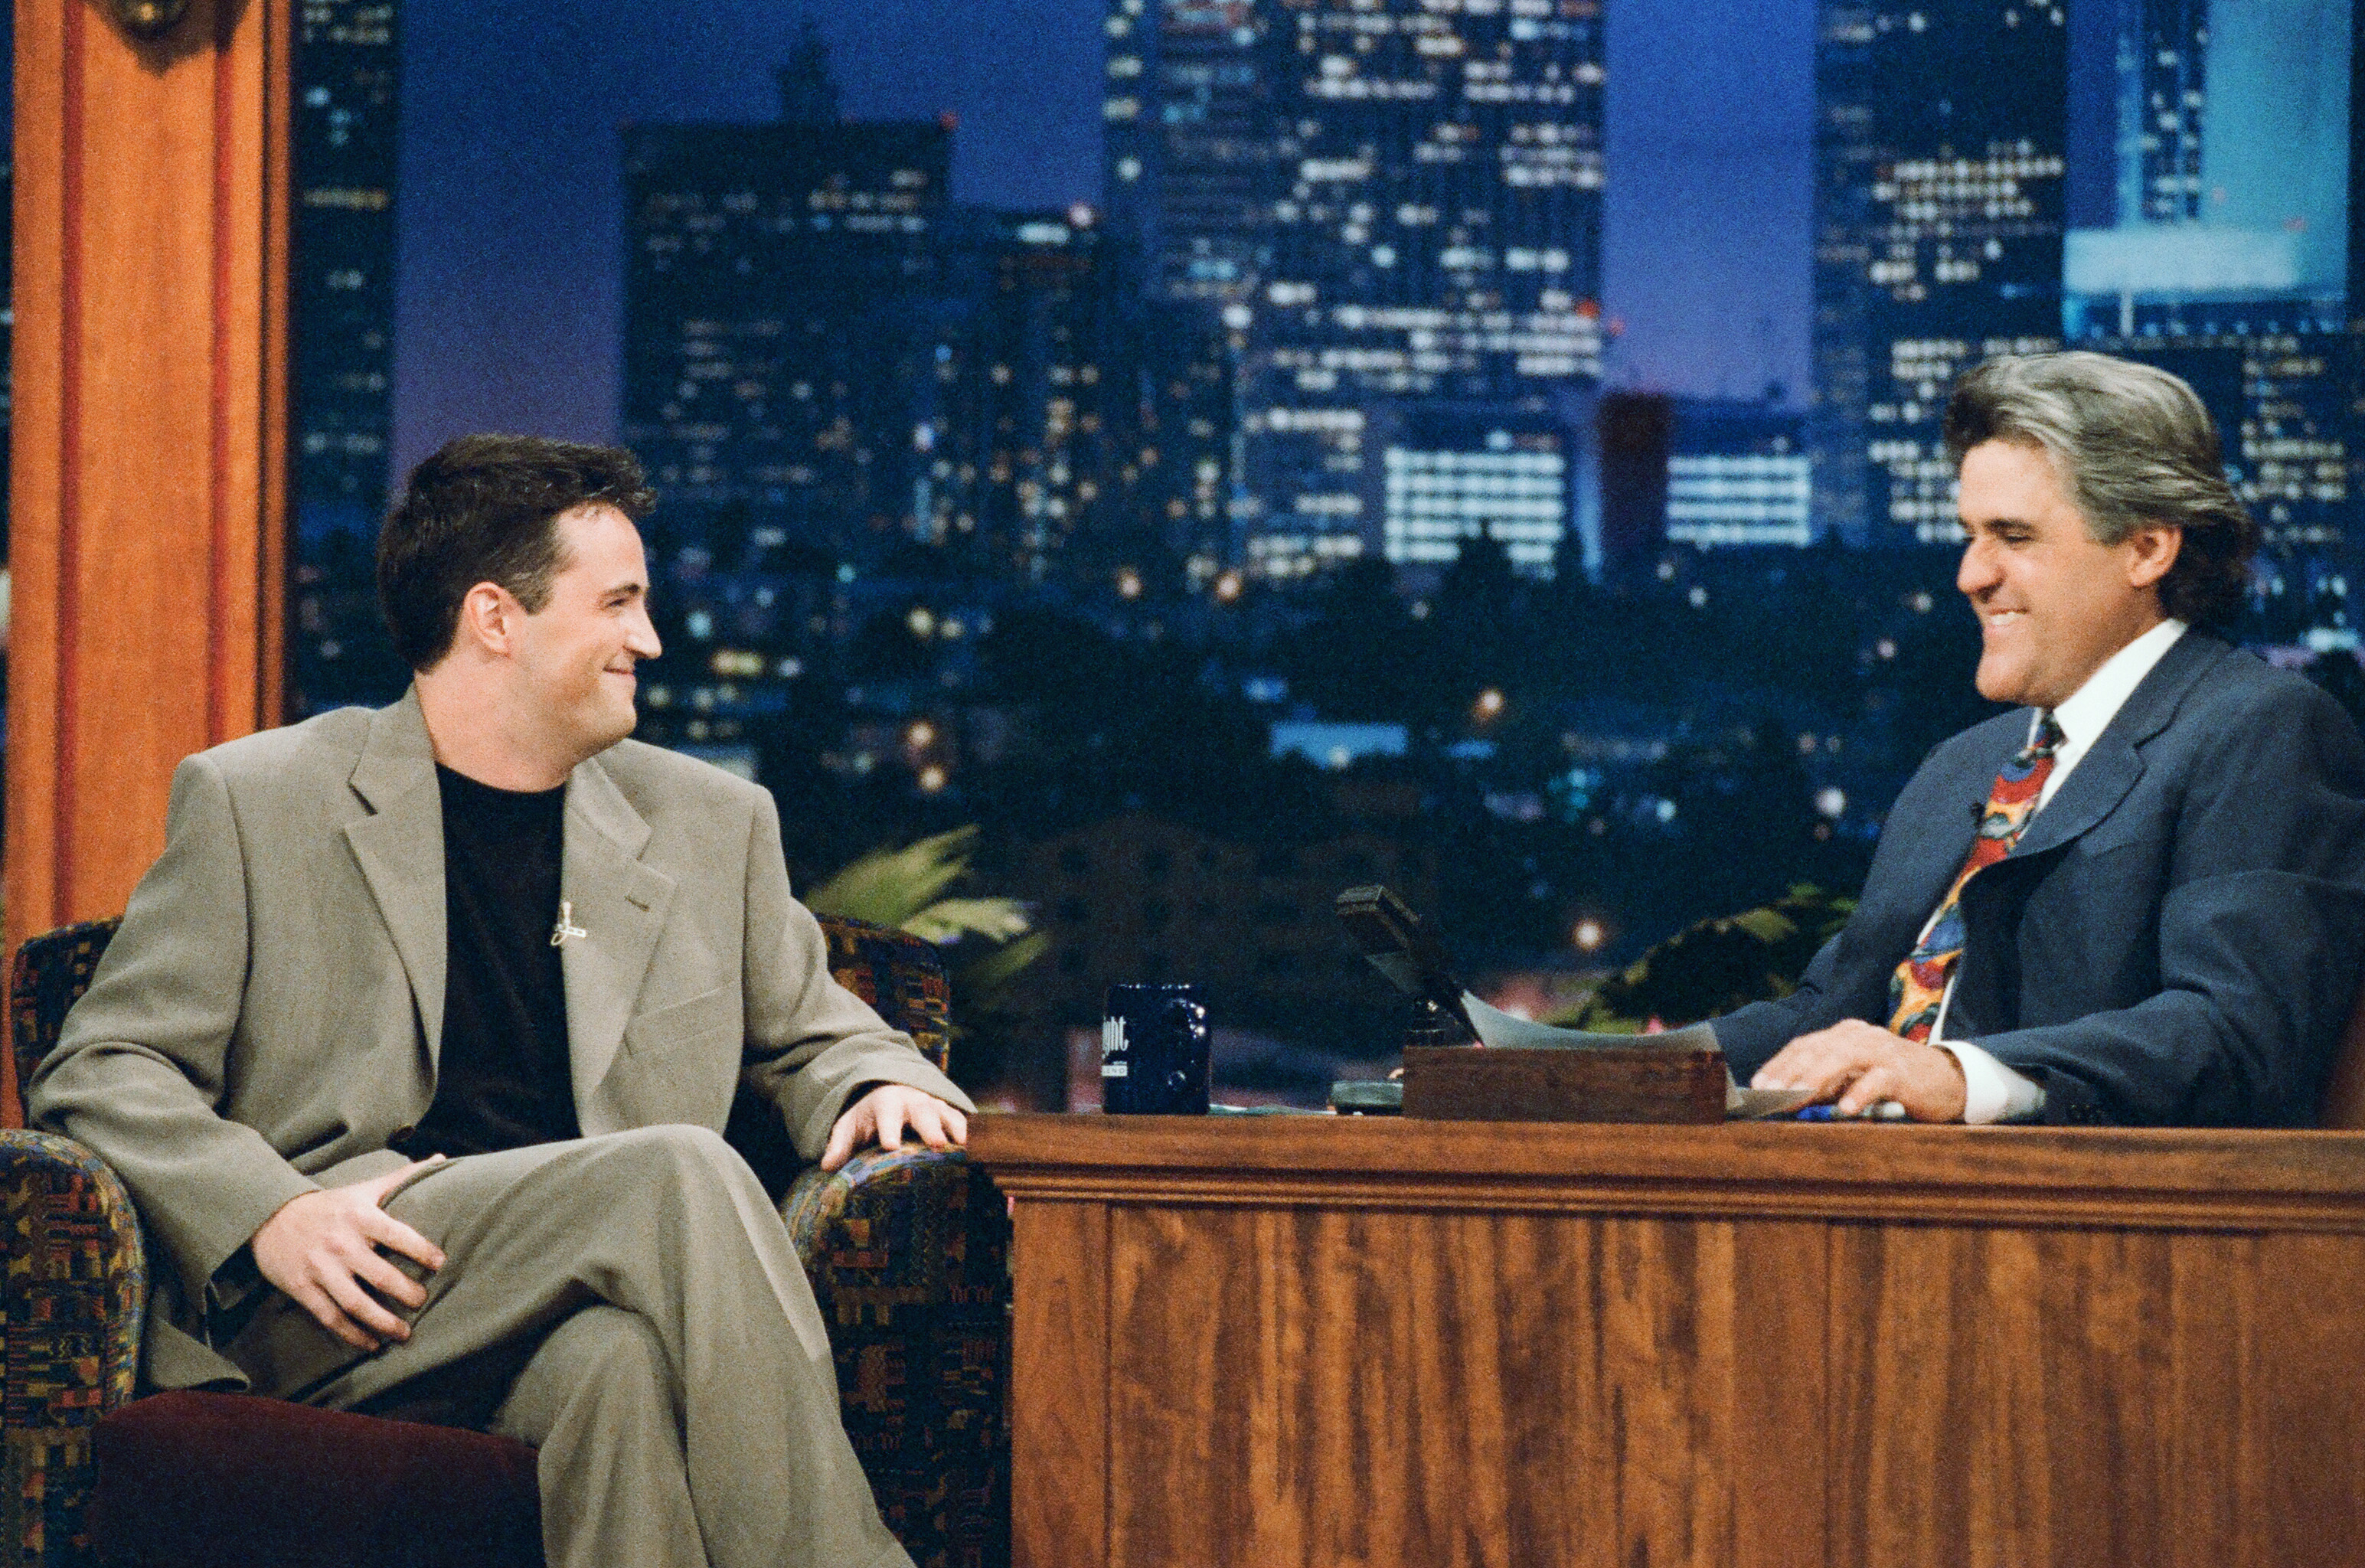 Matthew Perry lors d'une apparition au "Tonight Show with Jay Leno" le 30 août 1995. | Source : Getty Images